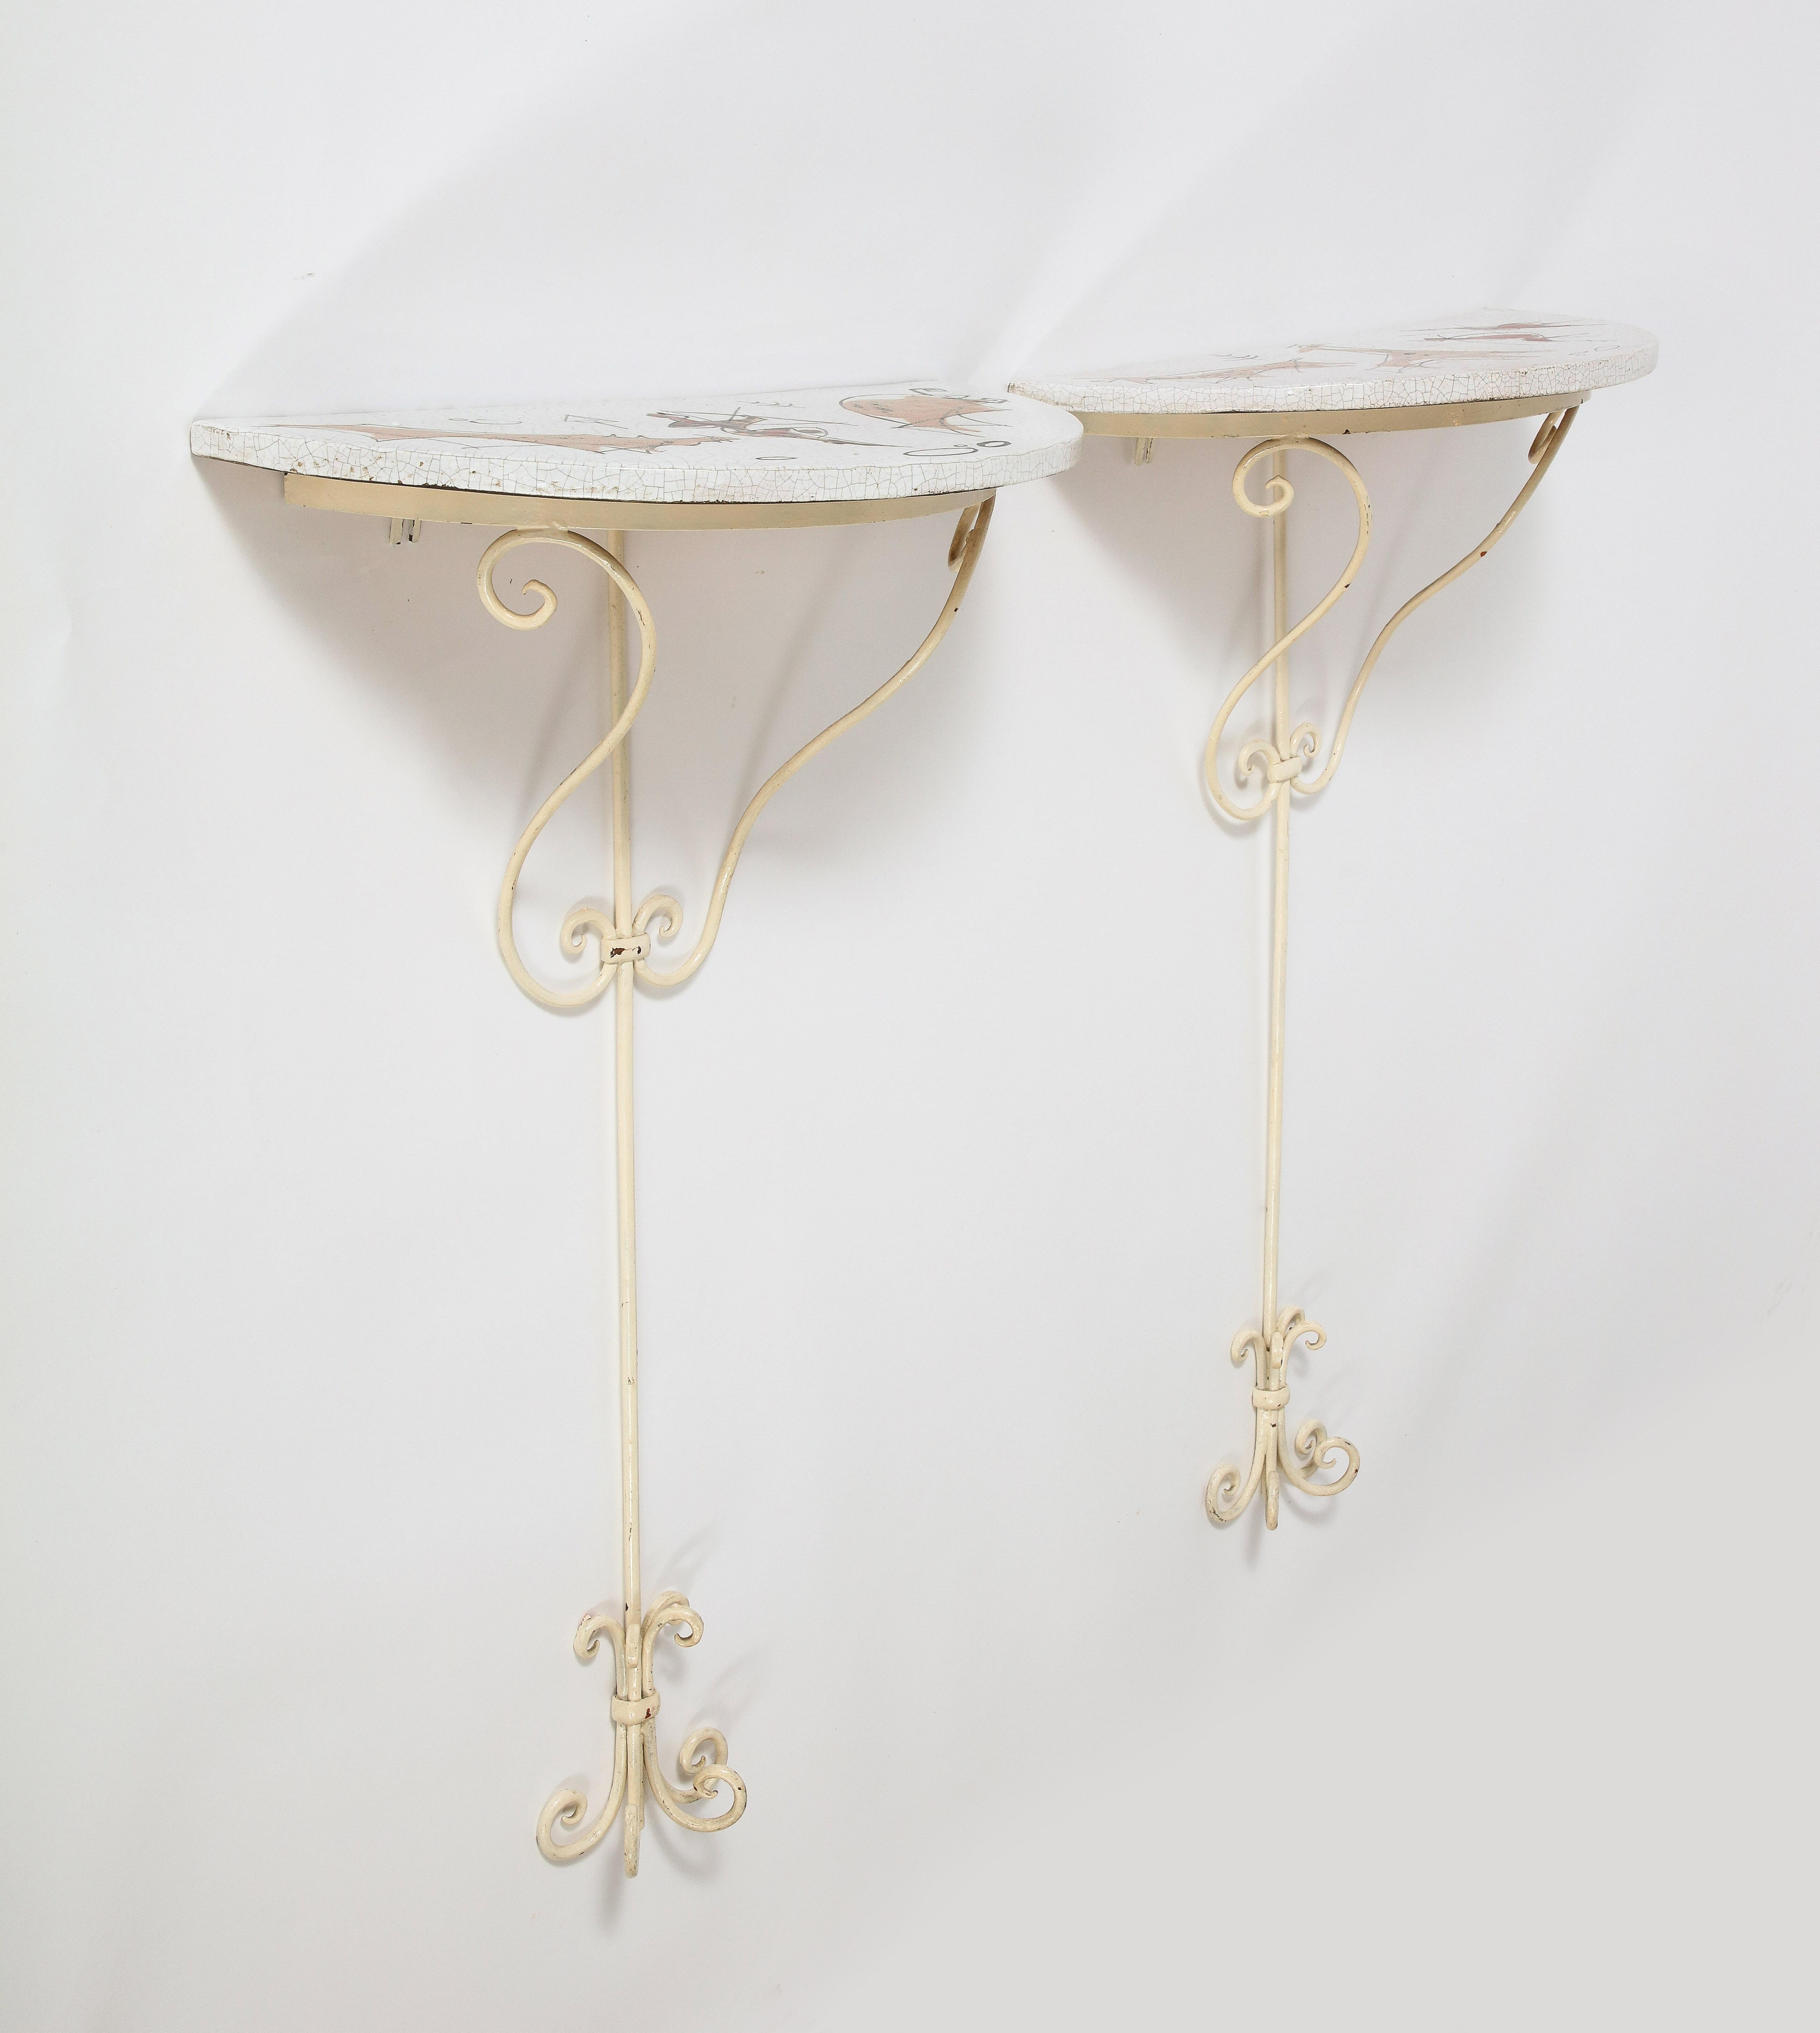 Arnaldo Miniati Pair of Ceramic and Iron Demi-Lune Wall Consoles, Italy, 1959 In Good Condition For Sale In New York, NY